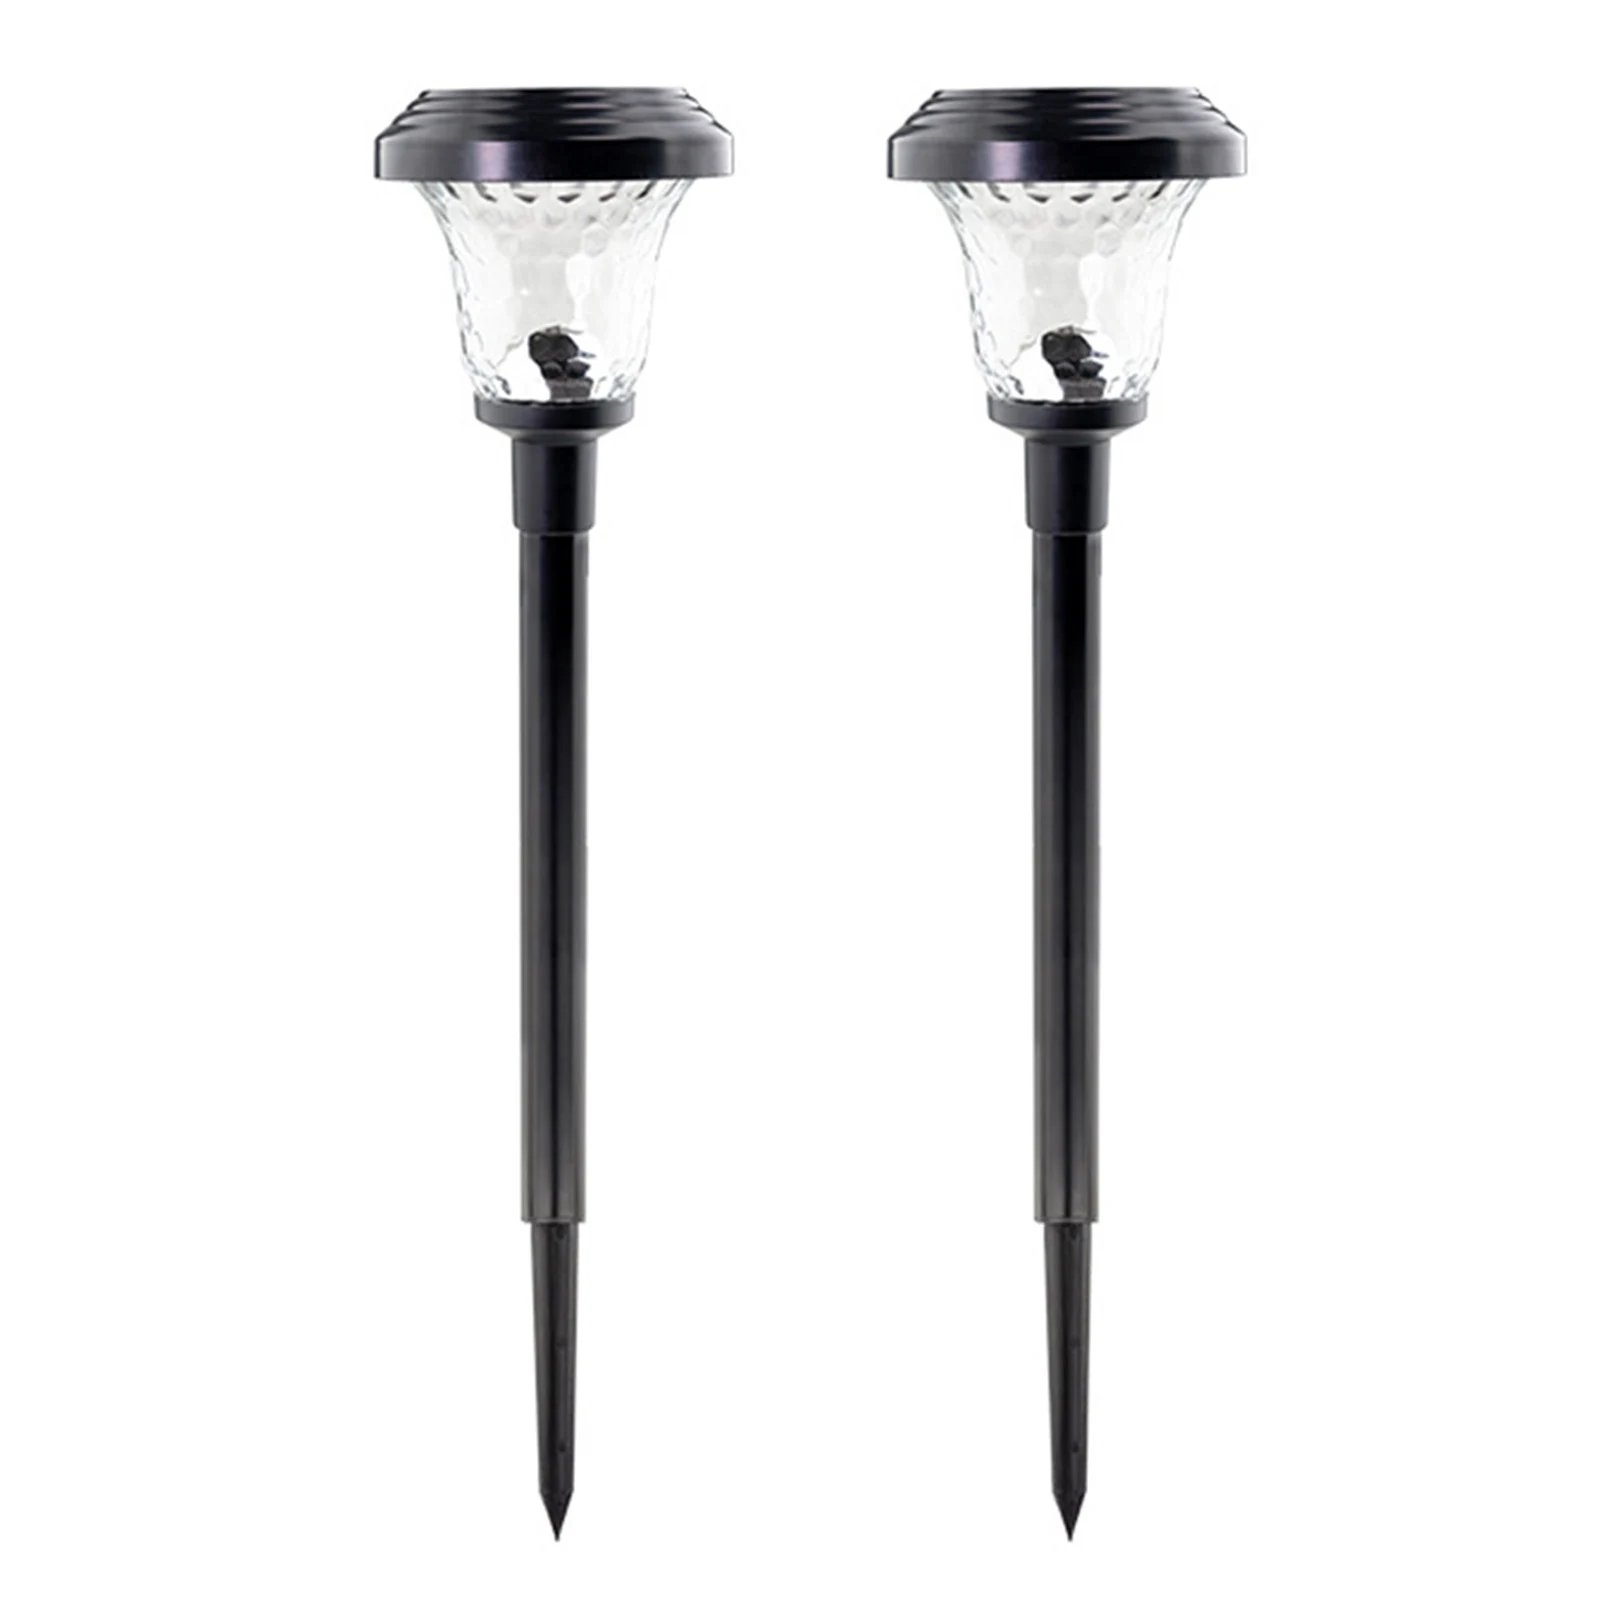 

2pcs Outdoor Waterproof Auto On Off Backyard Solar Pathway Light For Garden Lawn Patio Ground Led Home Decor Walkway Universal